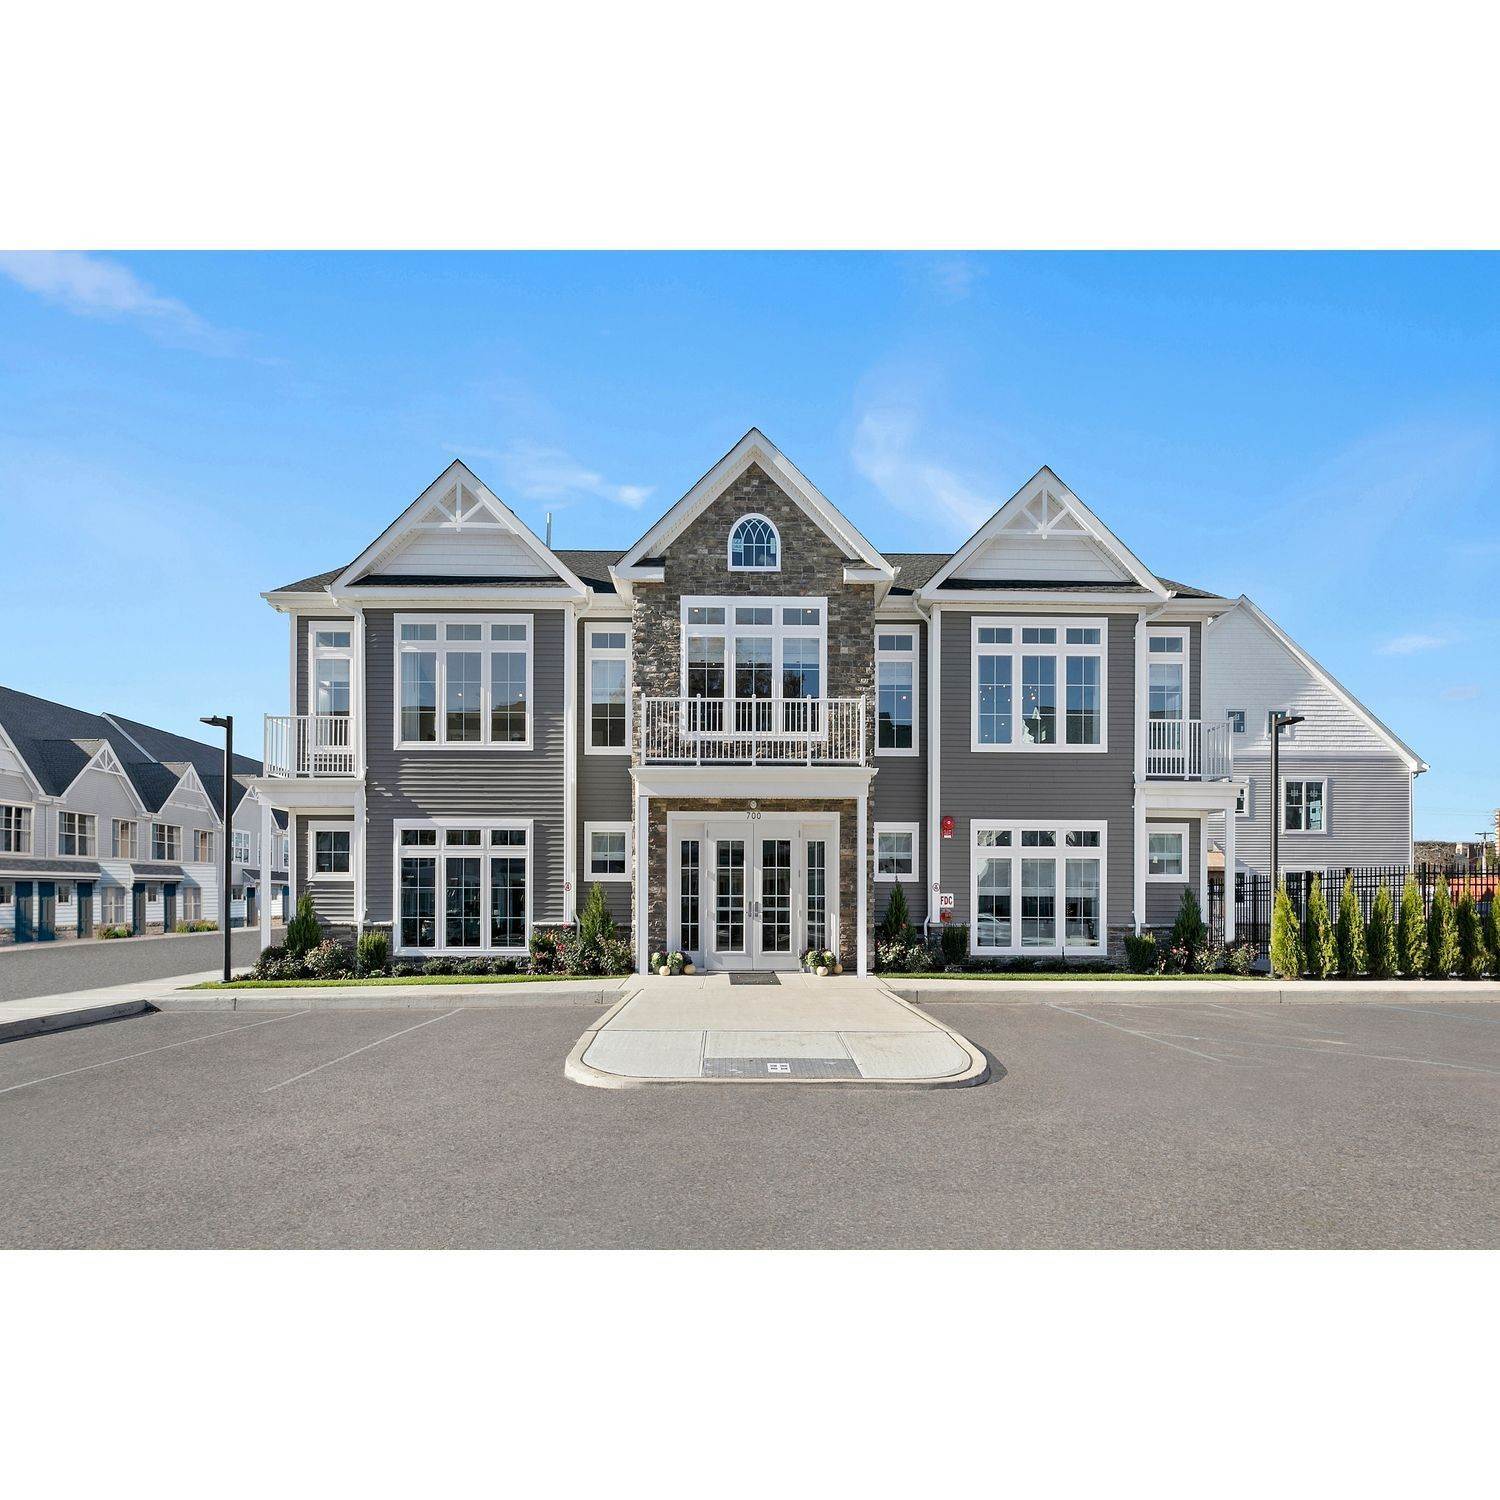 39. Meadowbrook Pointe East Meadow xây dựng tại 123 Merrick Avenue, East Meadow, NY 11554